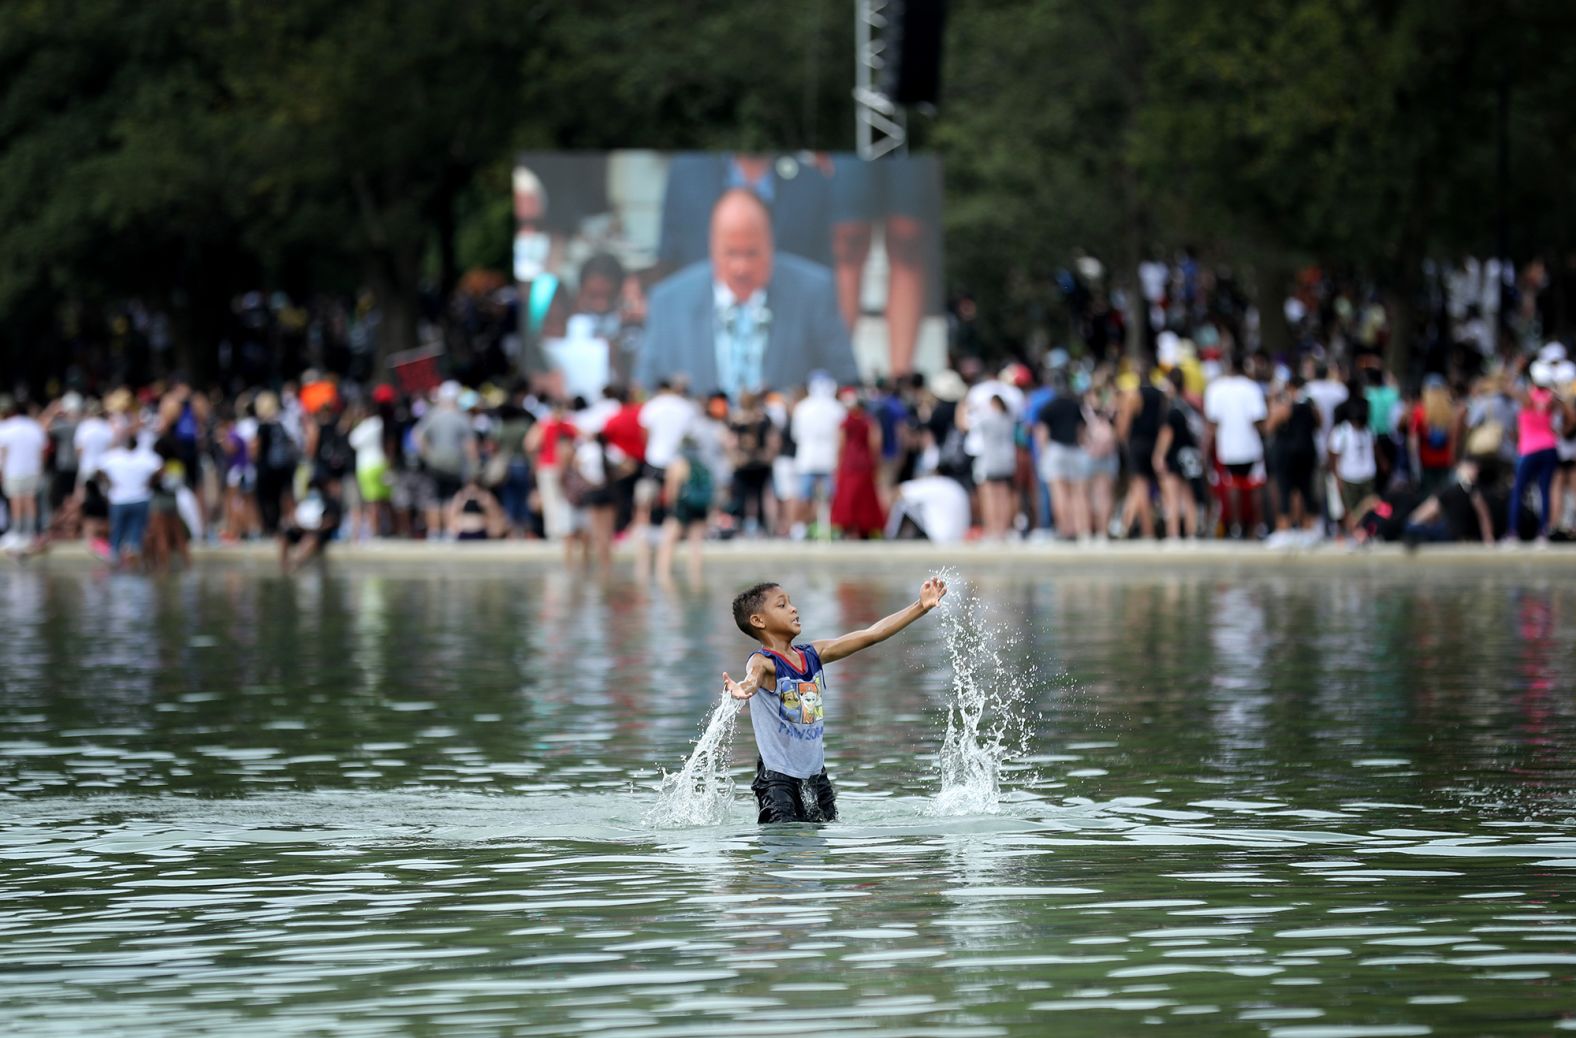 A boy cools off in the Lincoln Memorial's Reflecting Pool as Martin Luther King III speaks.